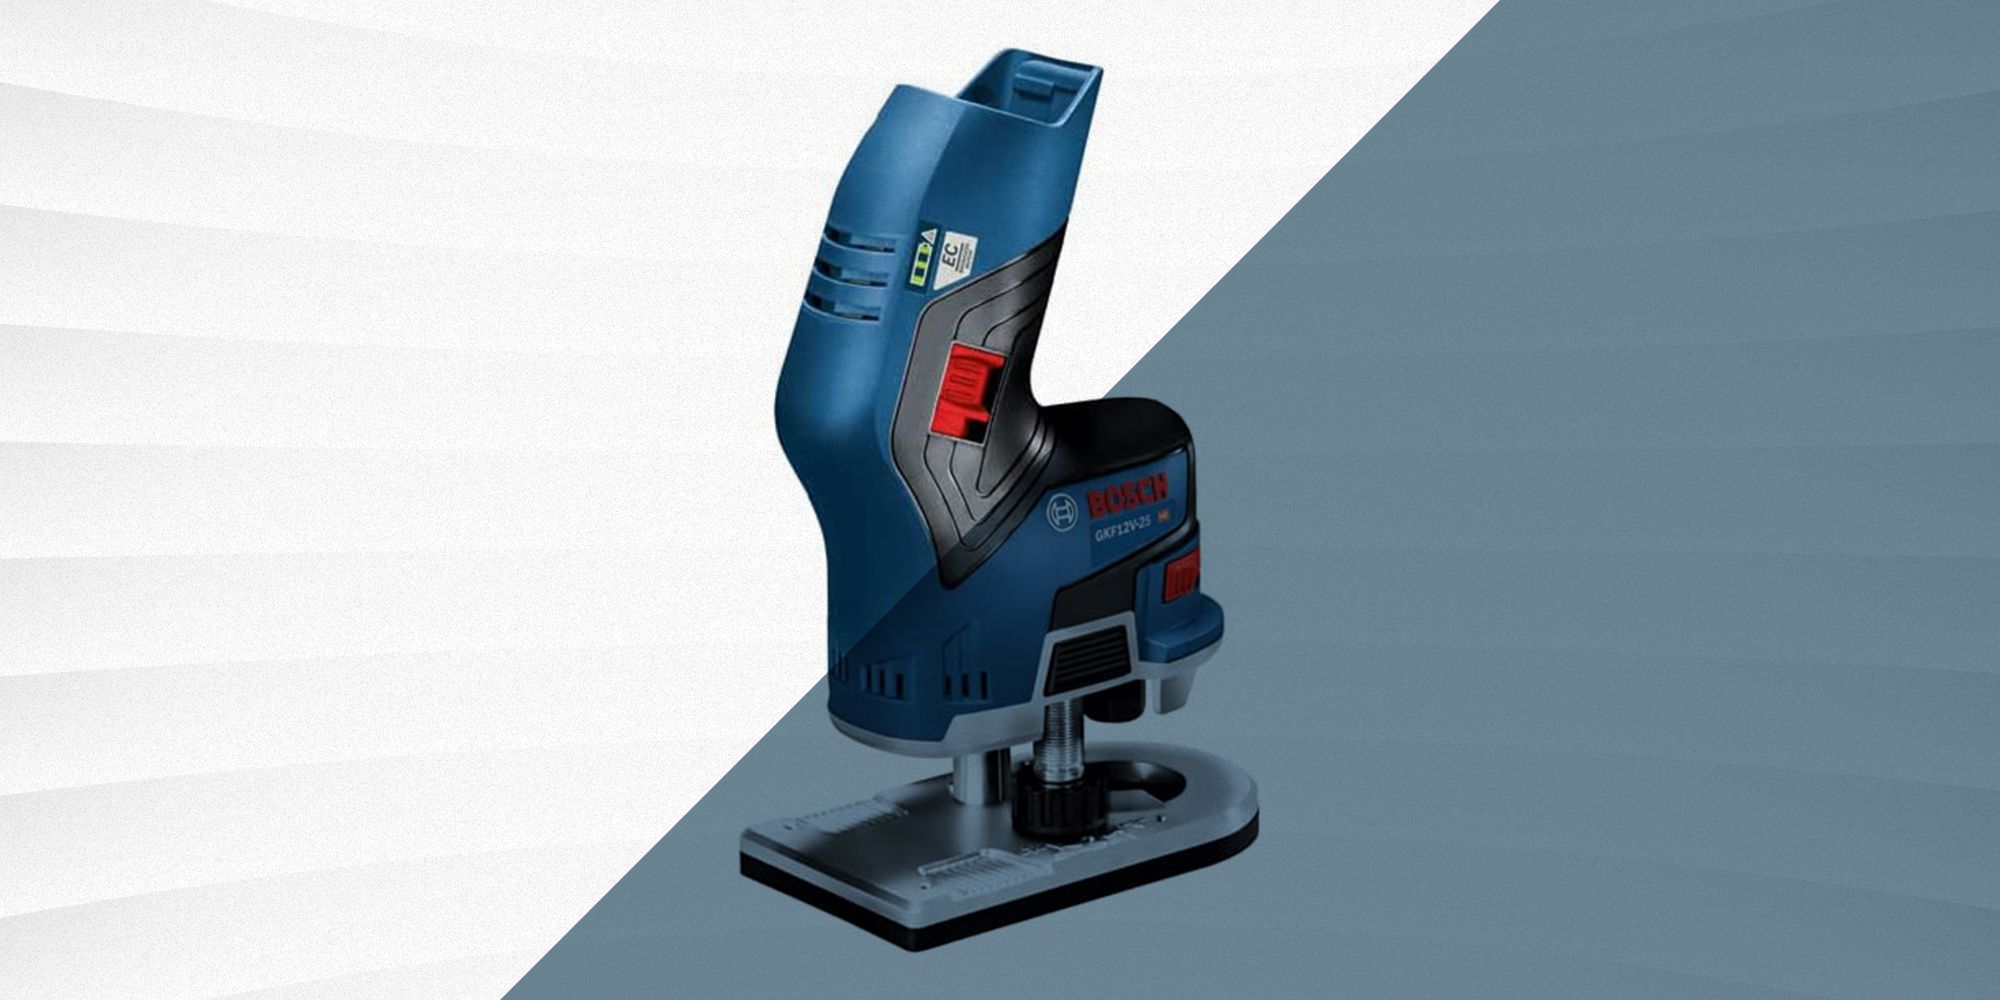 Top 7 Bosch Power Tools You Should Own 